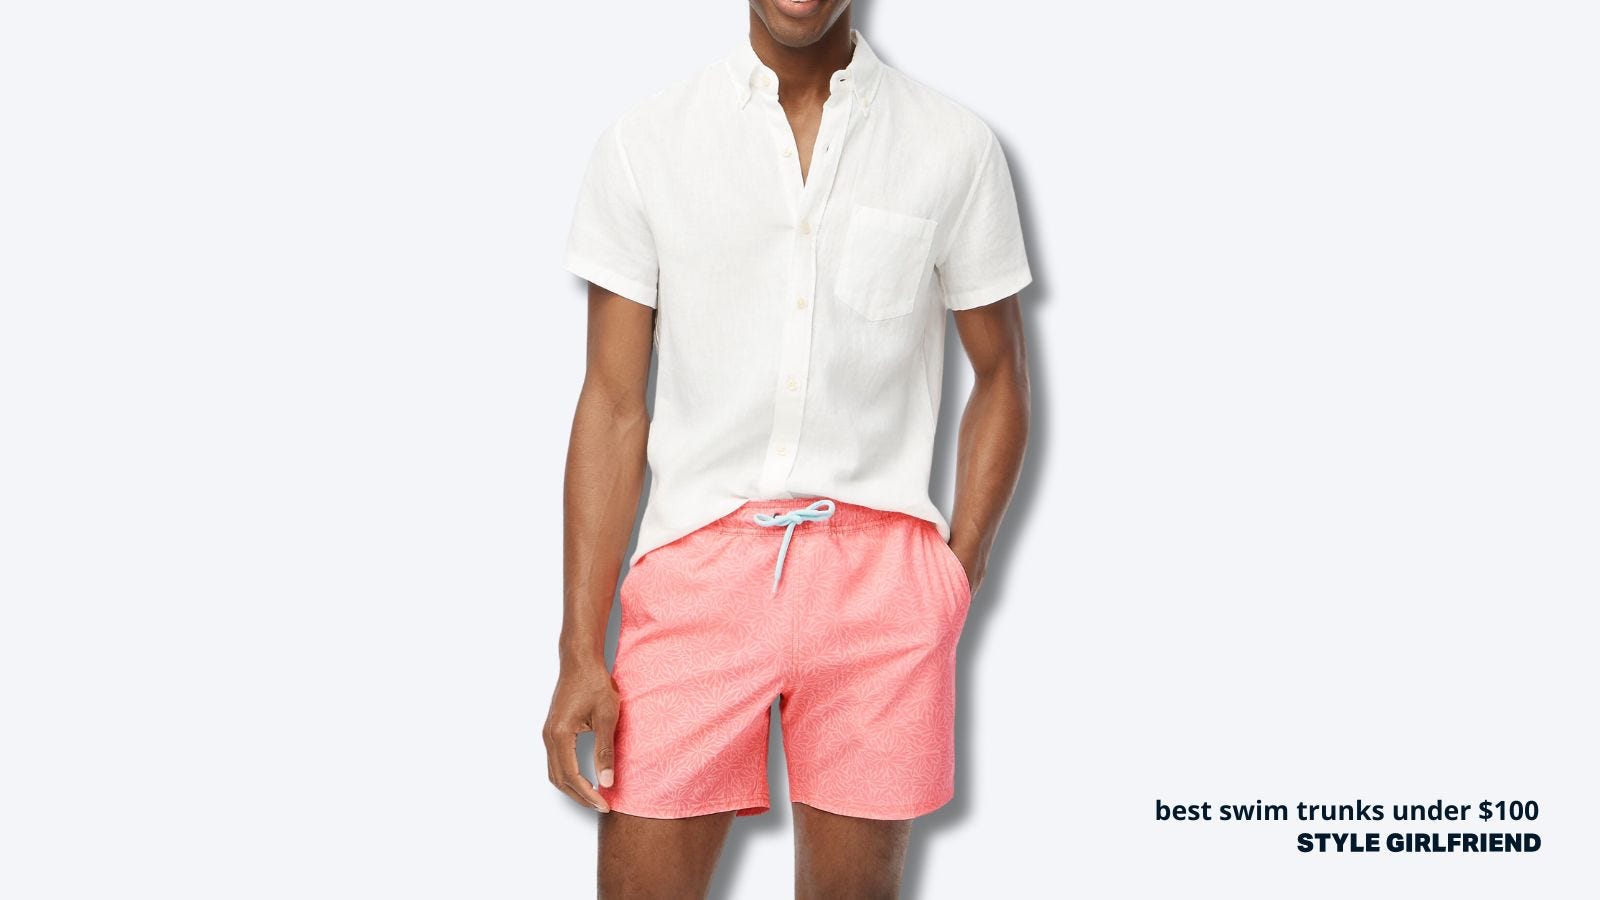 Close-up of man's torso and thighs. He wore a short-sleeved white shirt and salmon-colored drawstring swimming trunks.The text on the screen read: The Best Swim Trunks Under $100 | Style Girlfriend